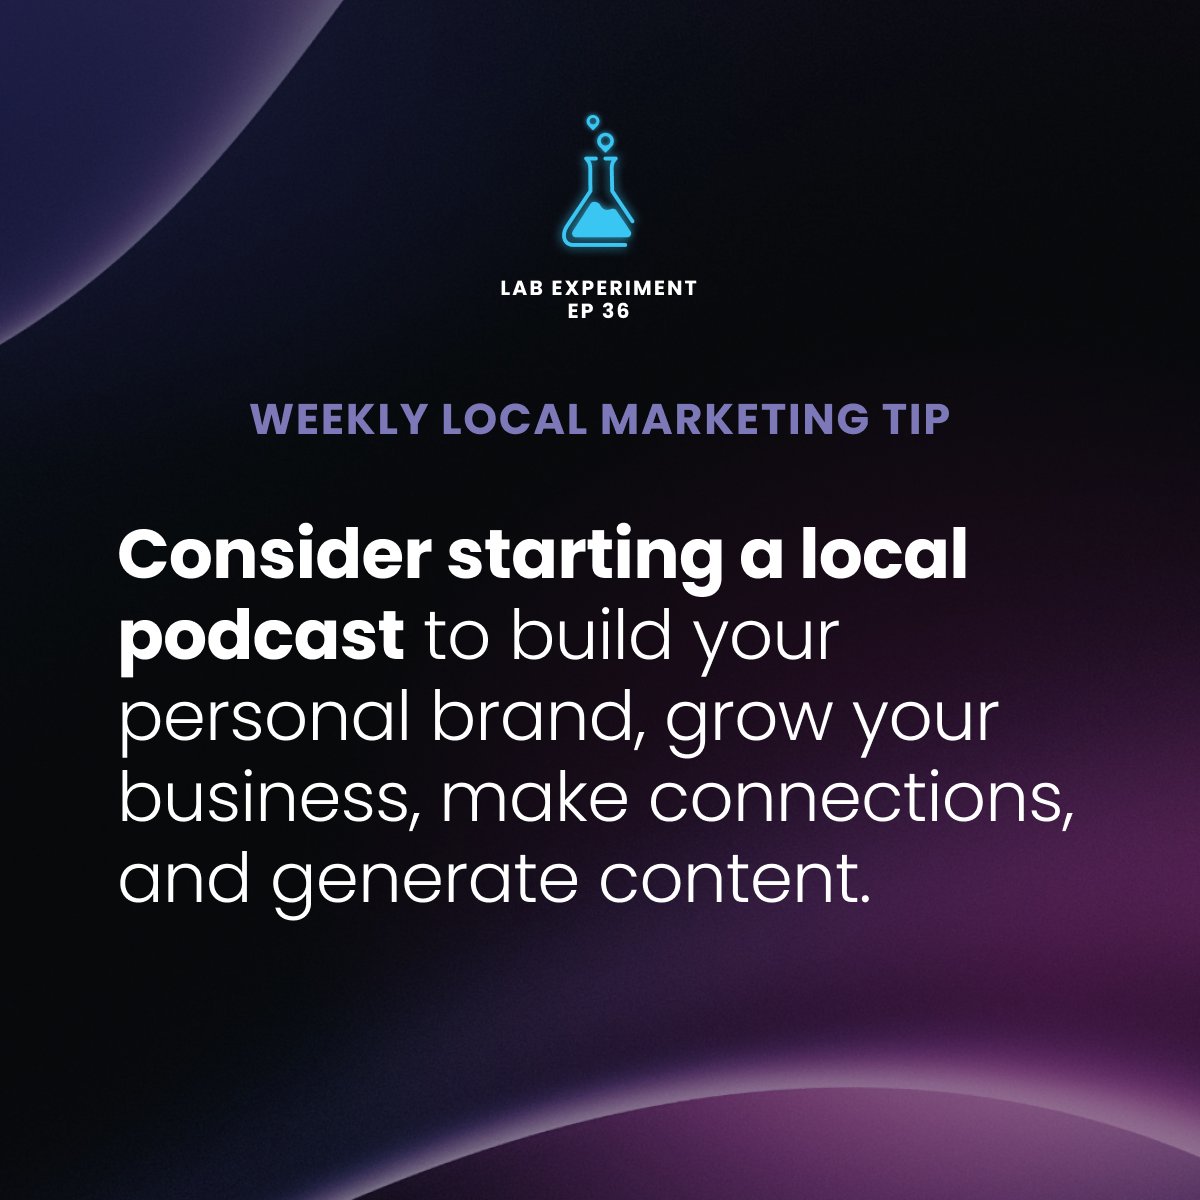 If you have a local business, you seriously need to consider starting a podcast.

A podcast allows you to build your business AND your personal brand.

Listen to Brian Vieaux's tips here: hubs.ly/Q02tlkyd0

#mortgagemarketing #personalbranding #localmarketing